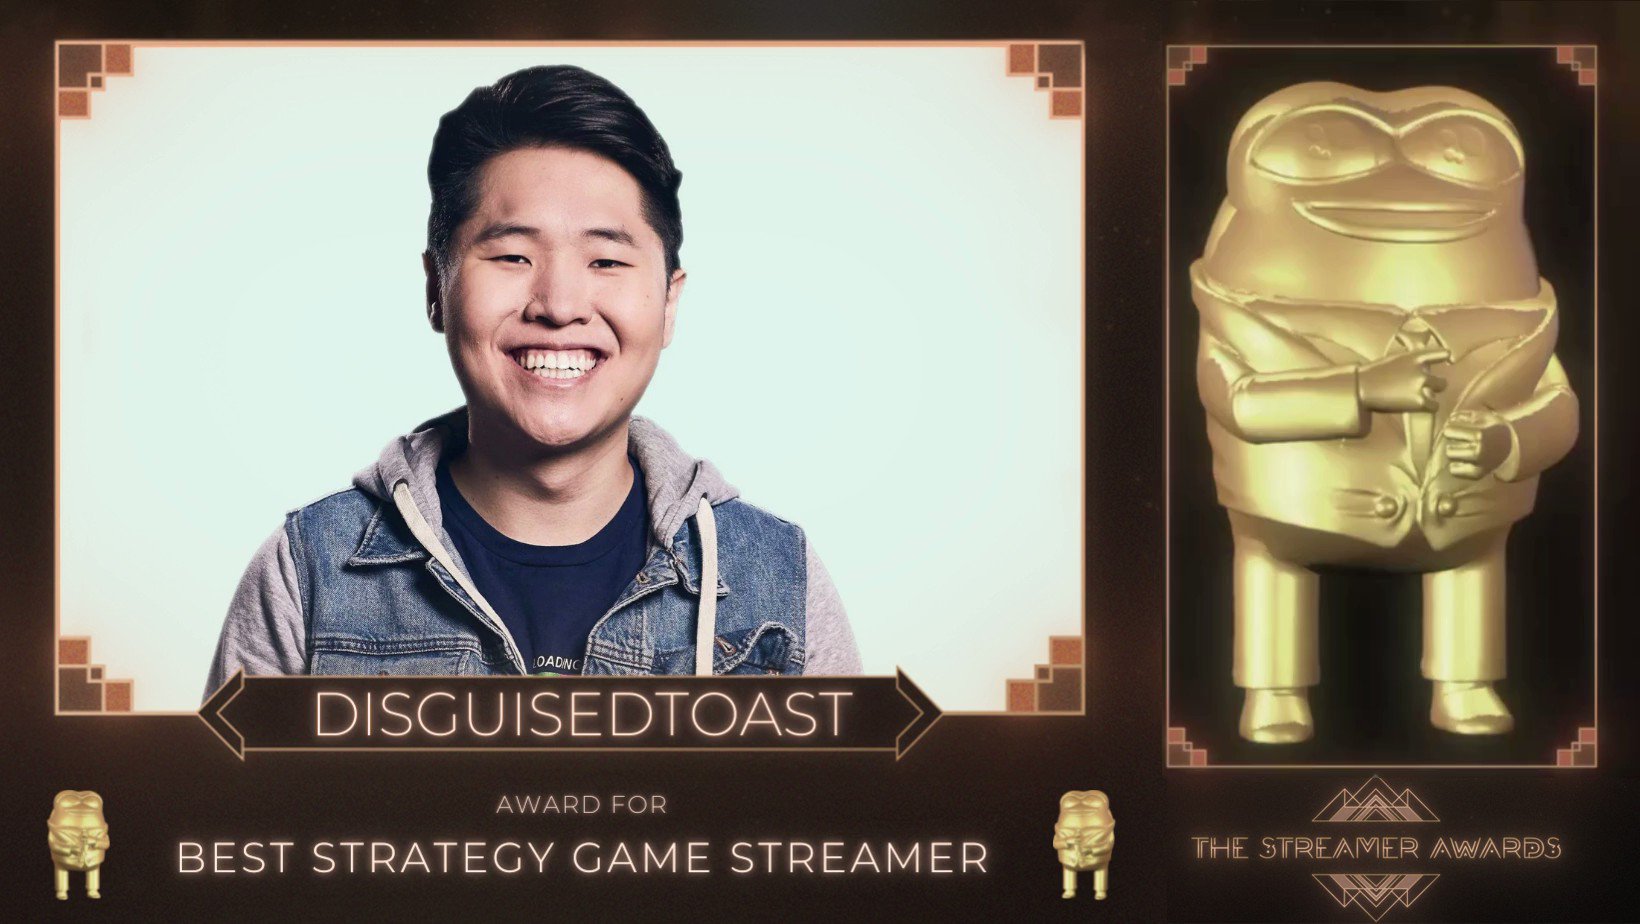 The Streamer Awards on X: From speedrunning to storytelling these